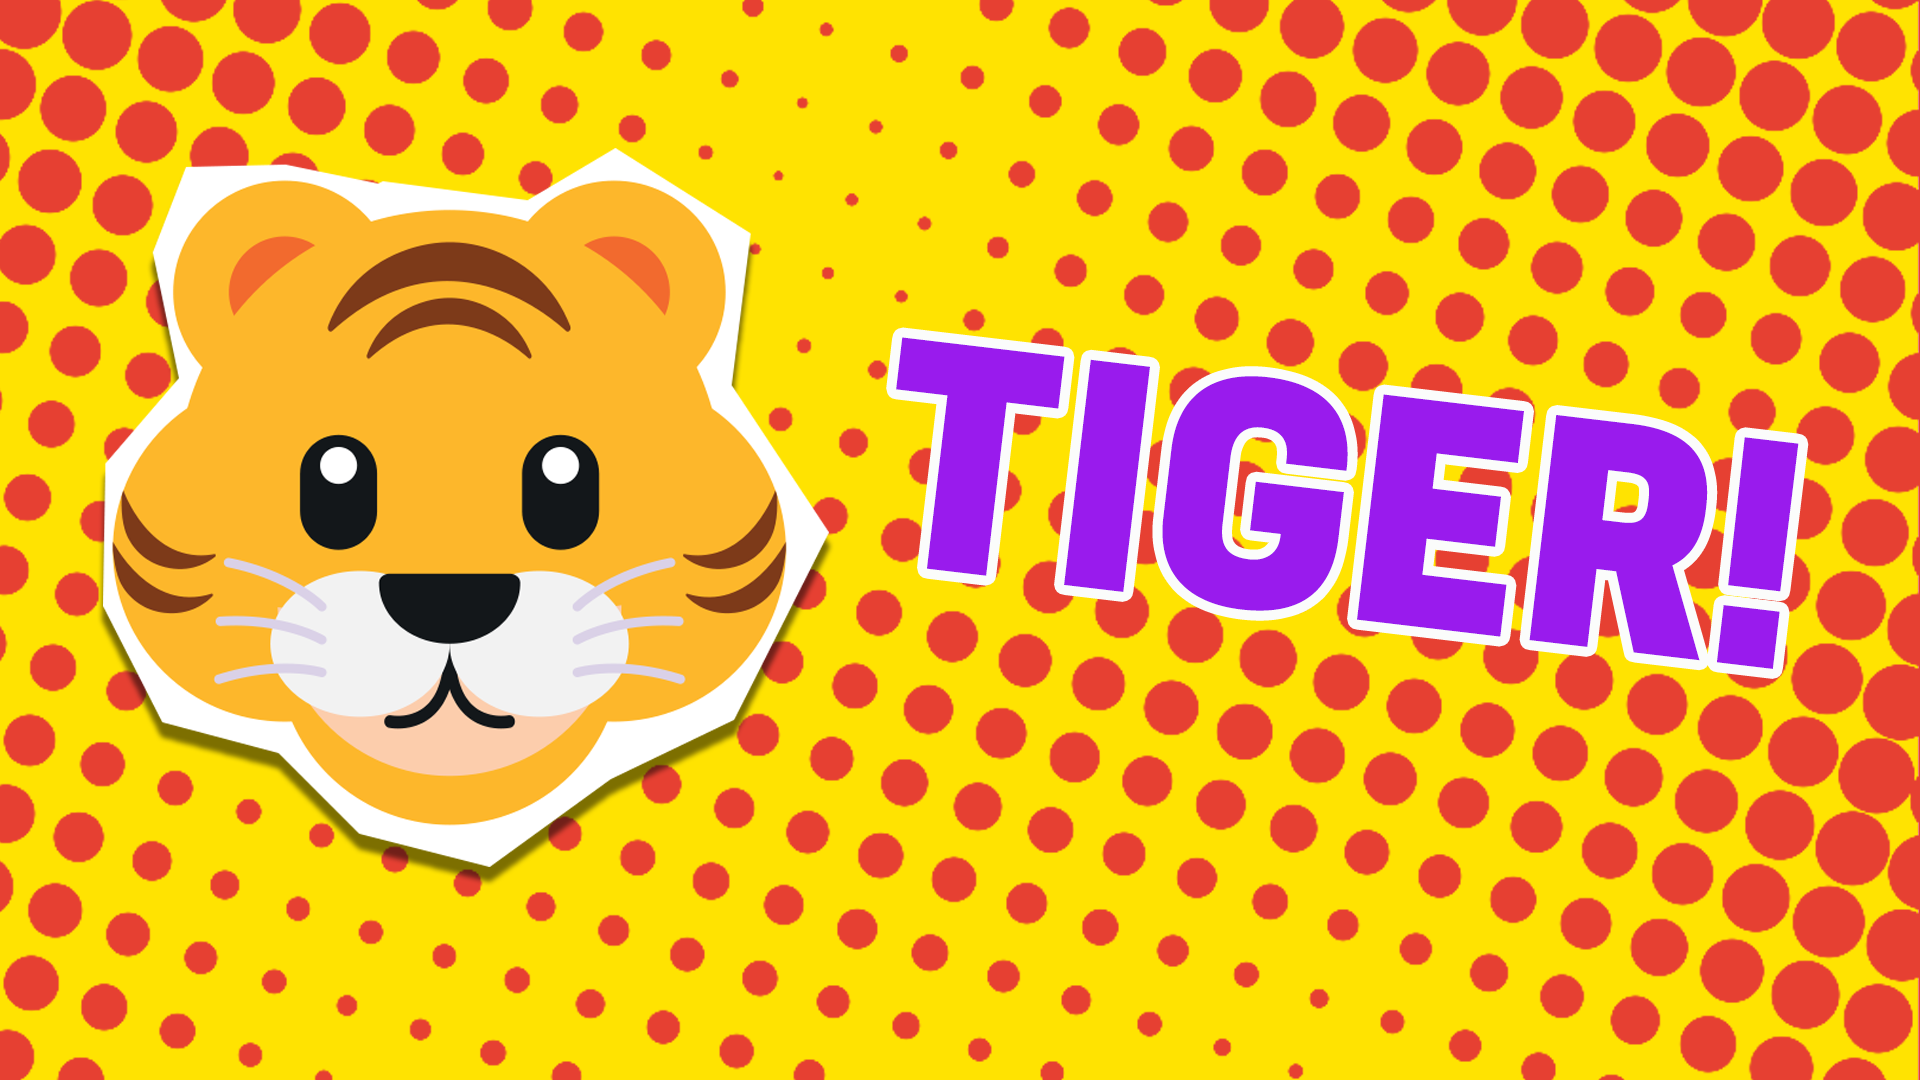 You're a tiger! You're fierce, powerful and bright orange and stripey! You can be extra scary when you need to be - but mostly, you just like naps. 